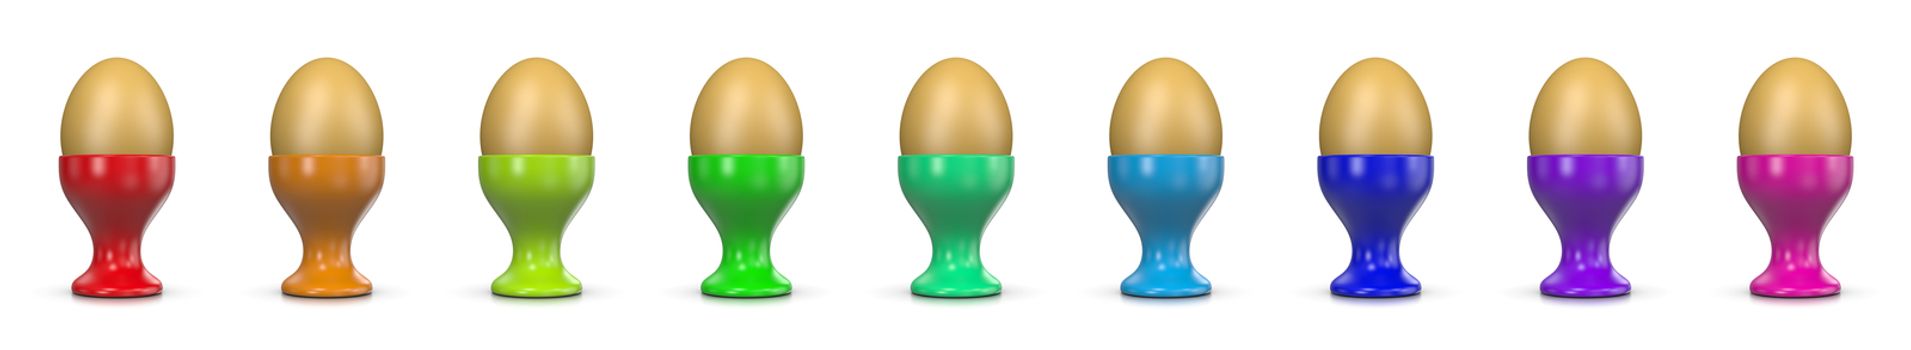 Colorful Egg Cups Series on White Background 3D Illustration